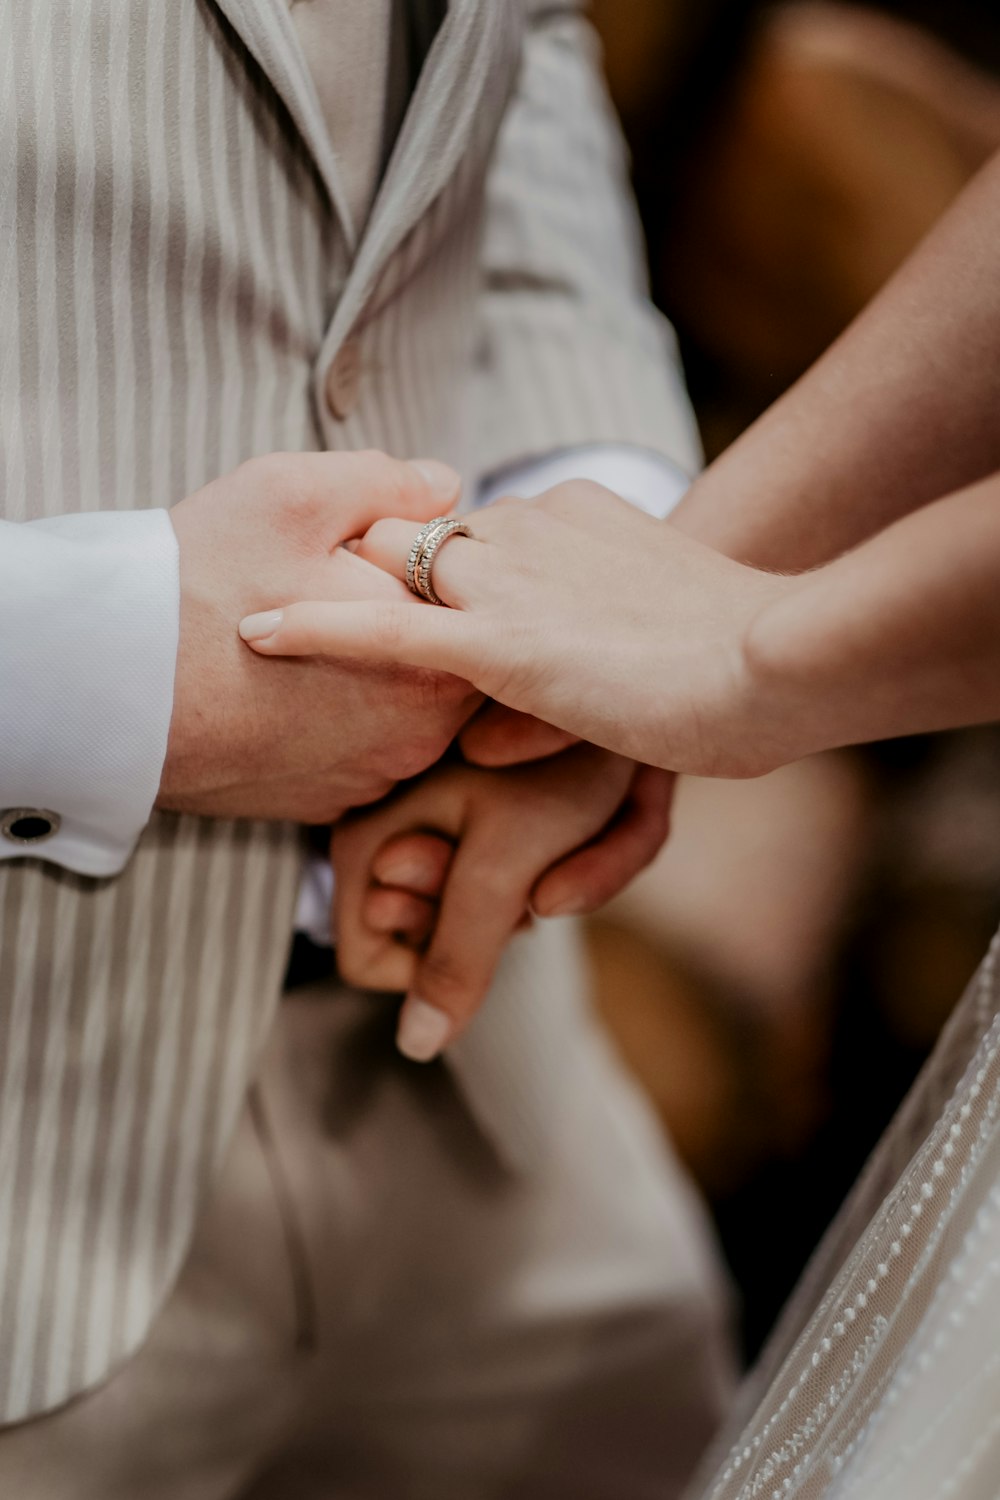 man in white dress shirt holding womans hand